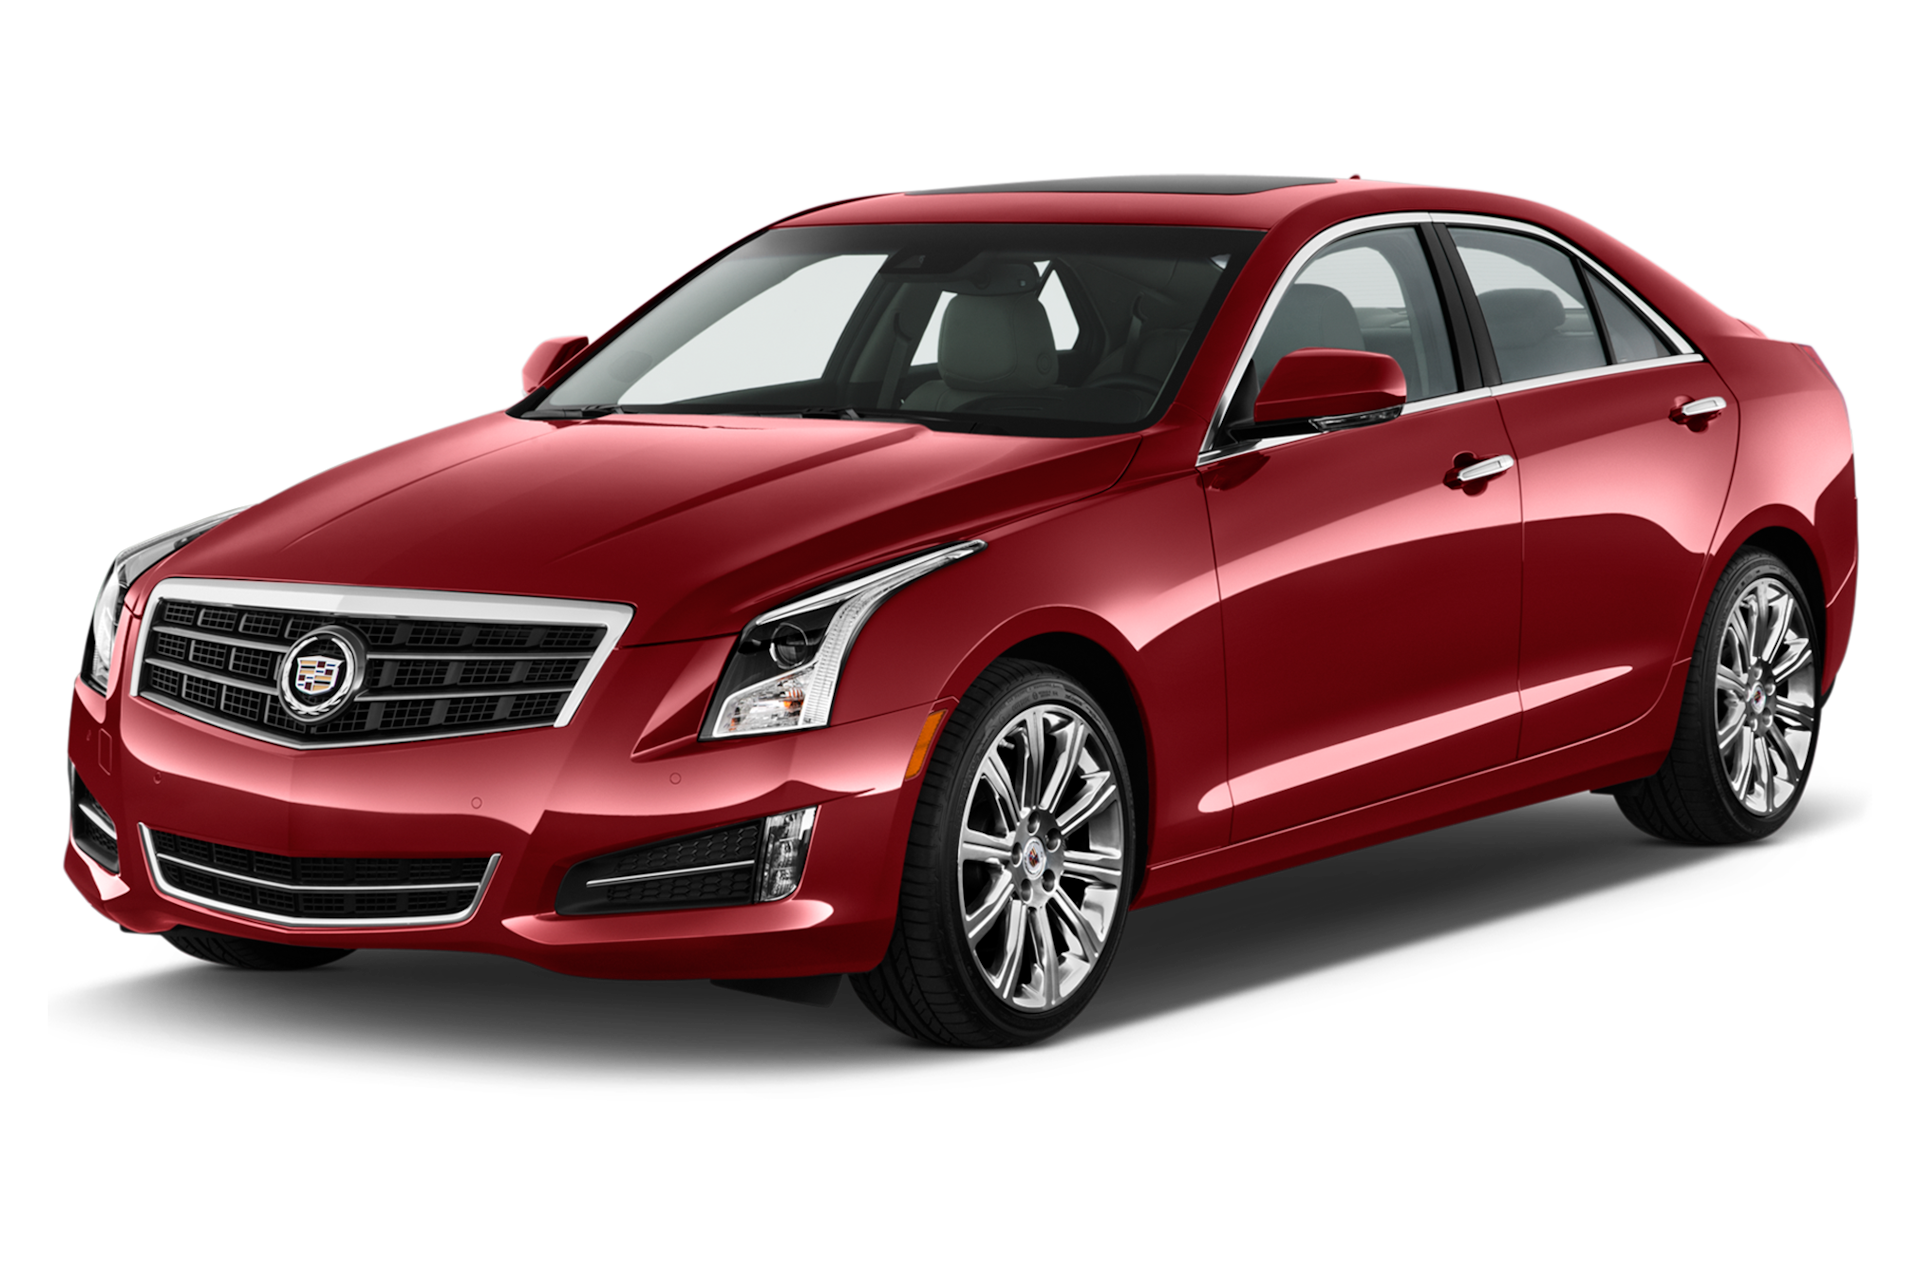 2013 Cadillac ATS Prices, Reviews, and Photos - MotorTrend